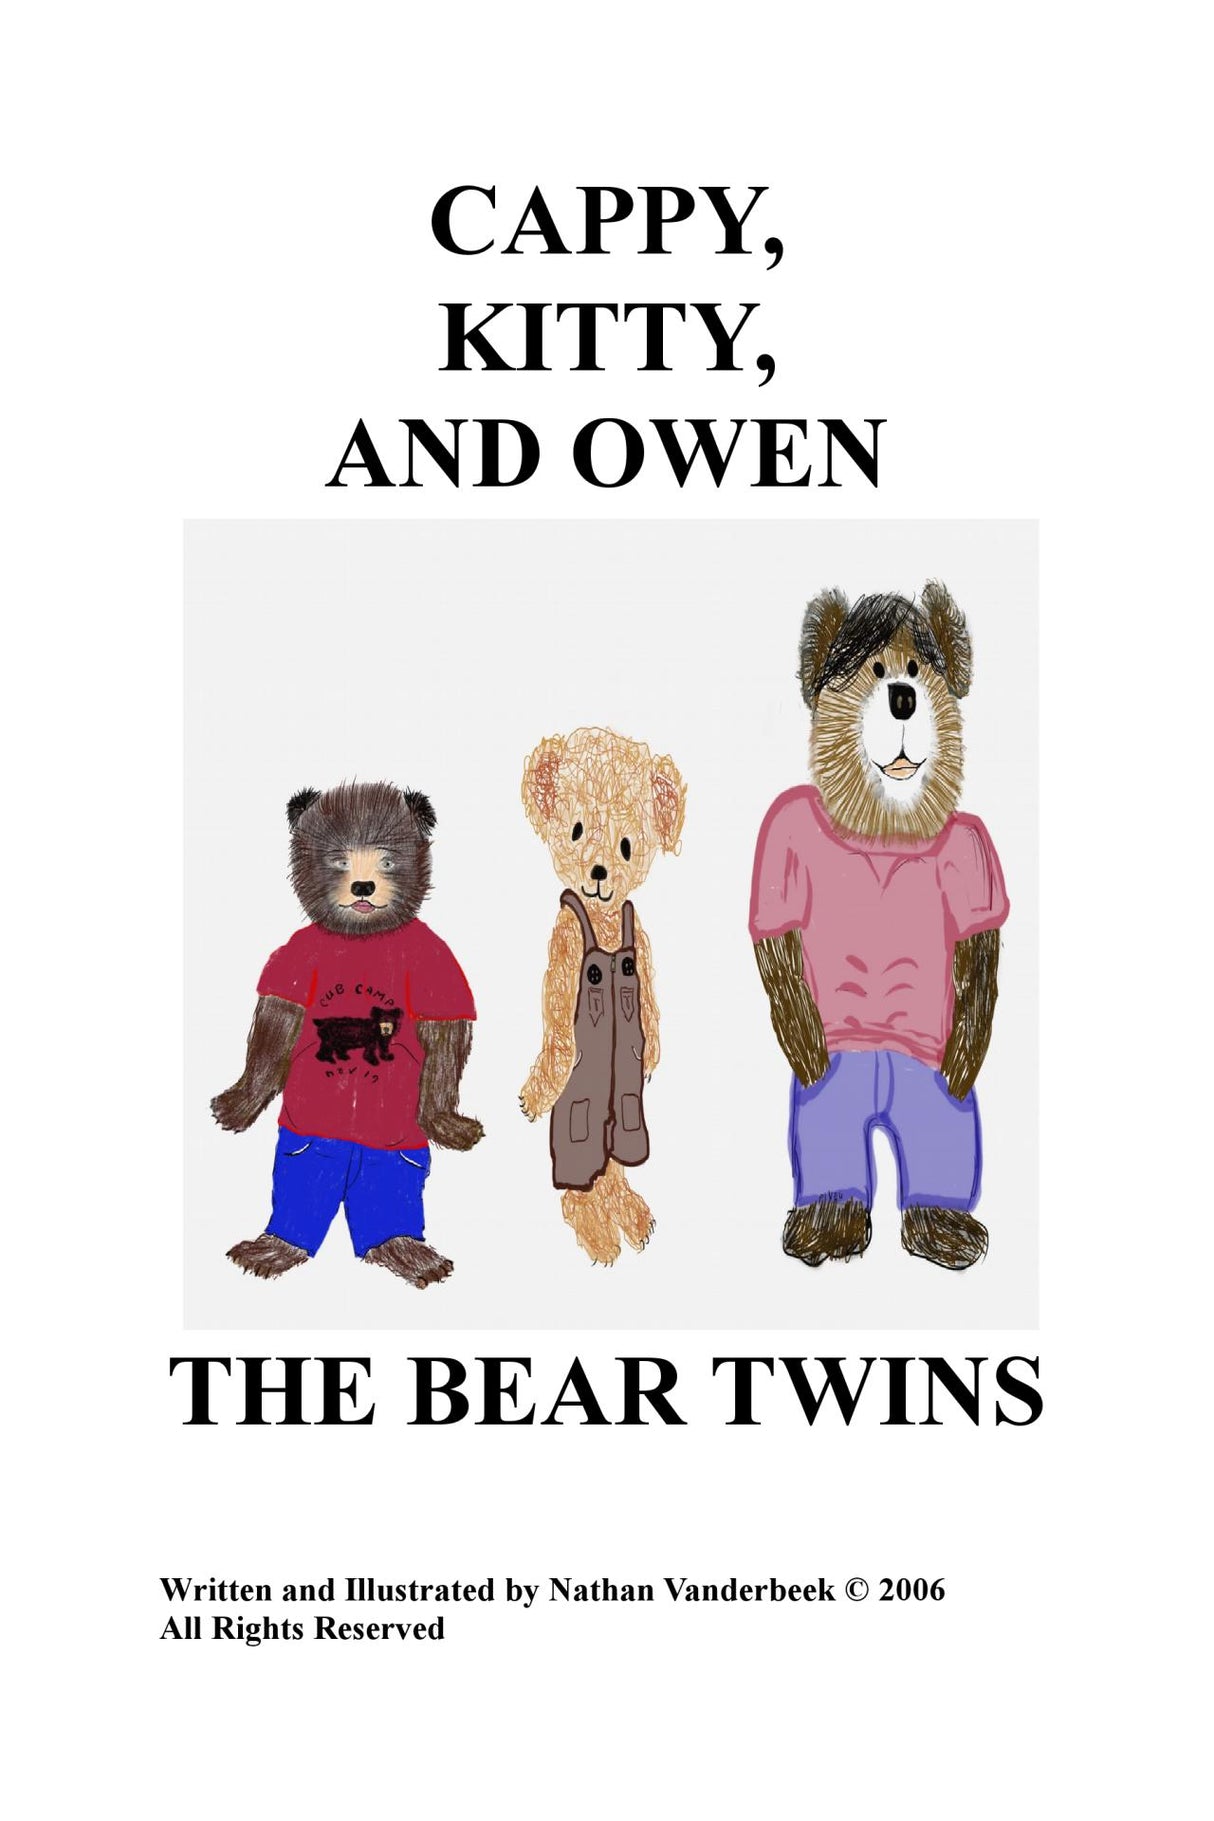 CAPPY, KITTY, AND OWEN:  THE BEAR TWINS